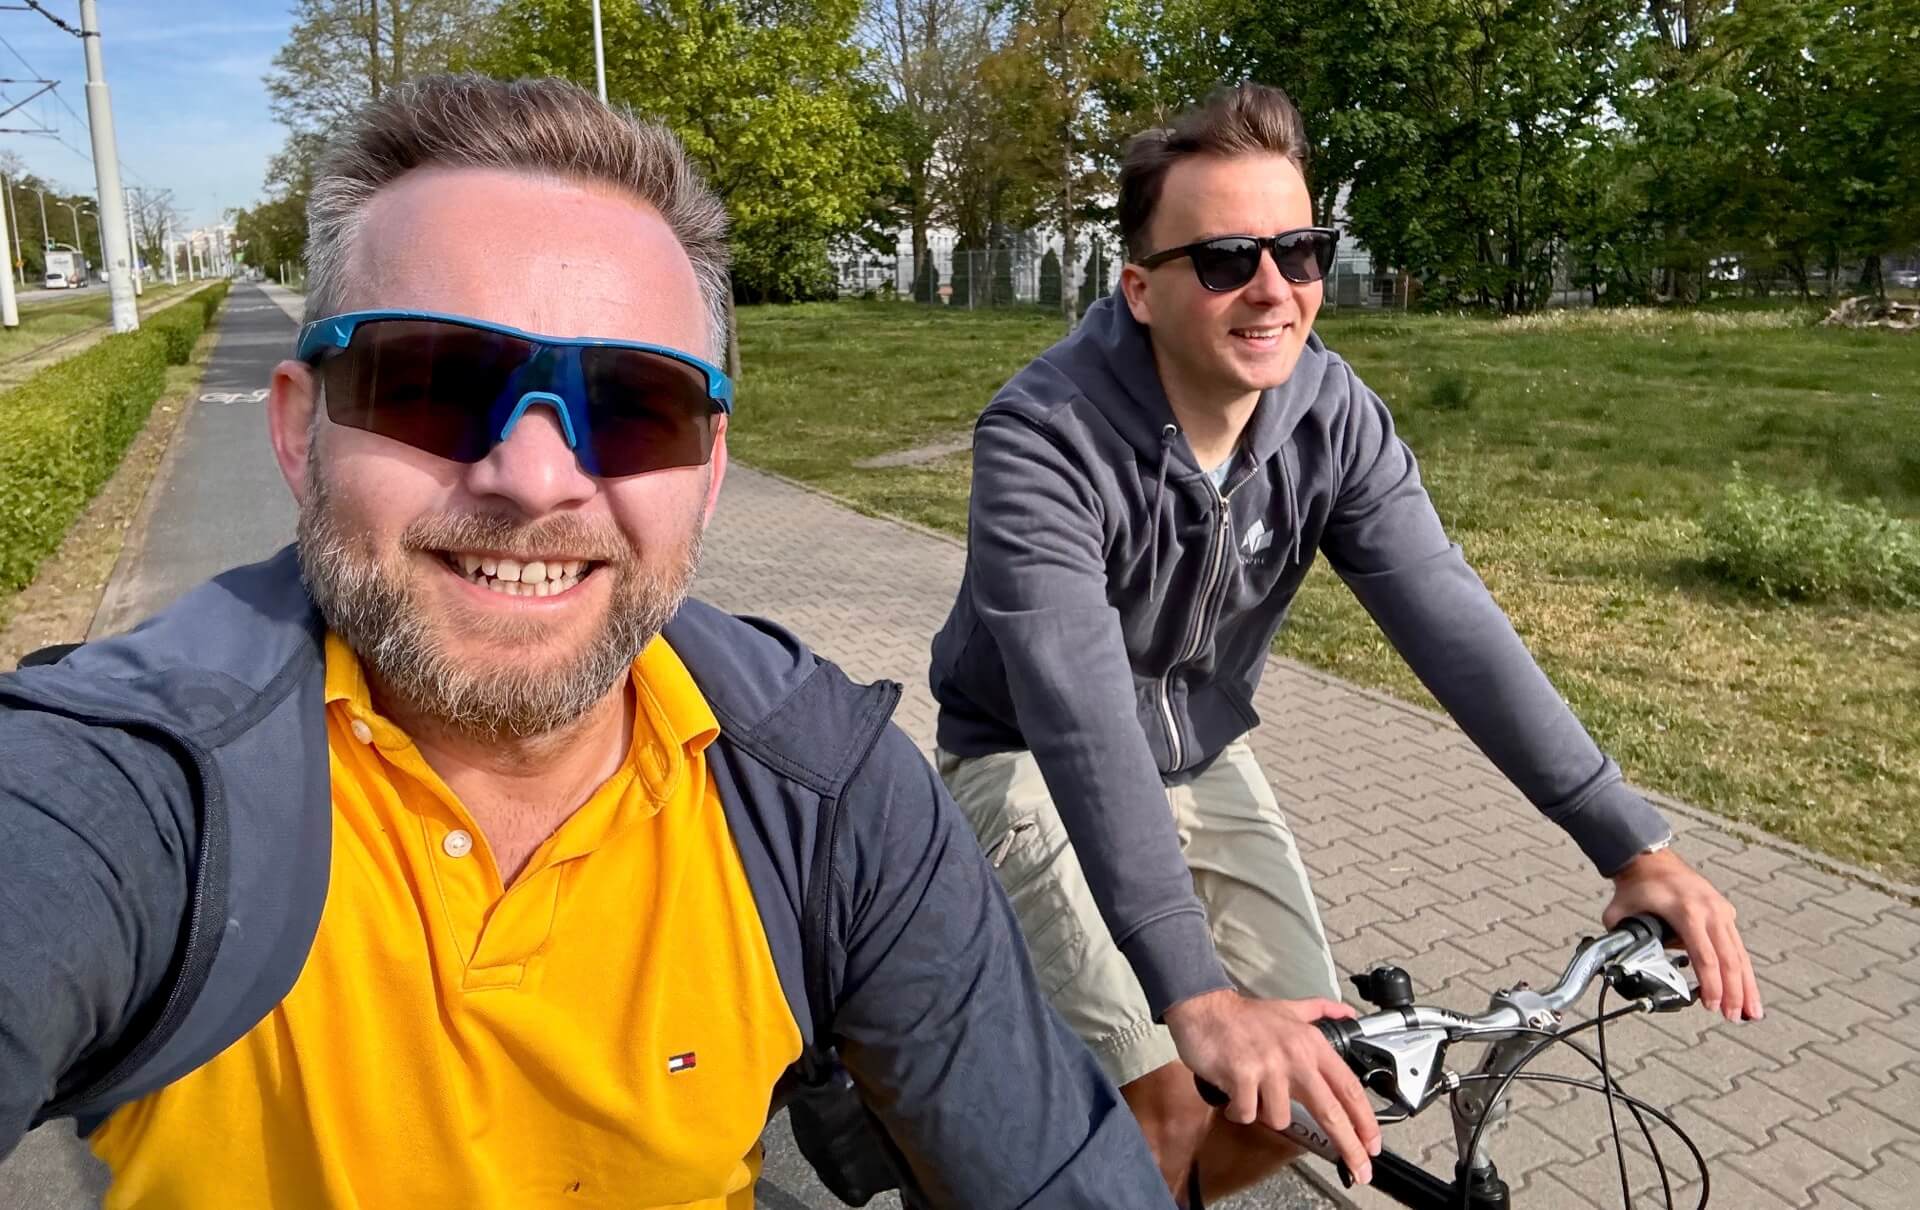 Visiting a city is an opportunity to reconnect with people, especially if you’re working remotely bikes